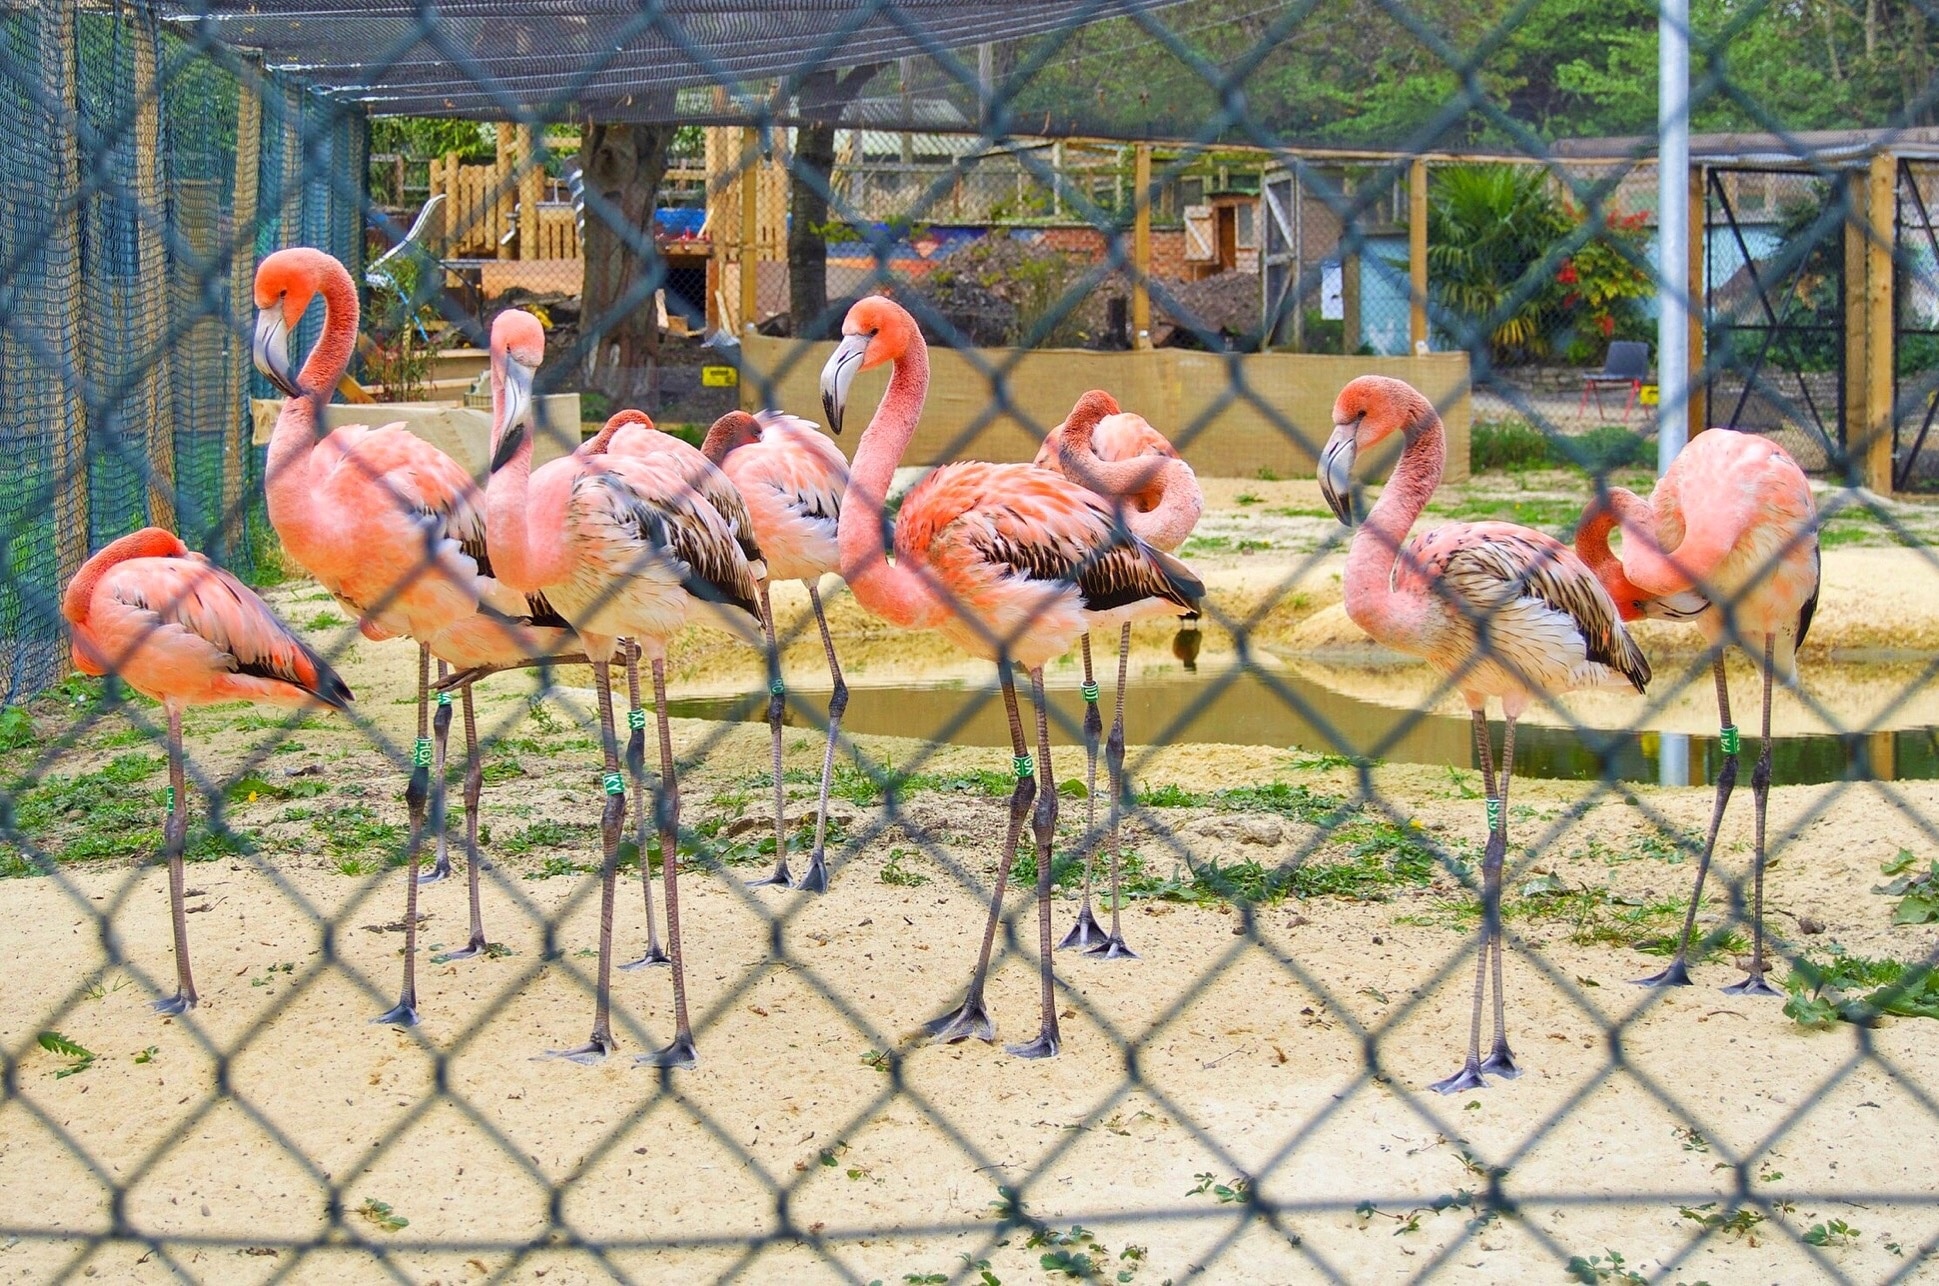 From Pink Flamingos to Meerkats #HanwellZoo is surrounded by beautiful species

